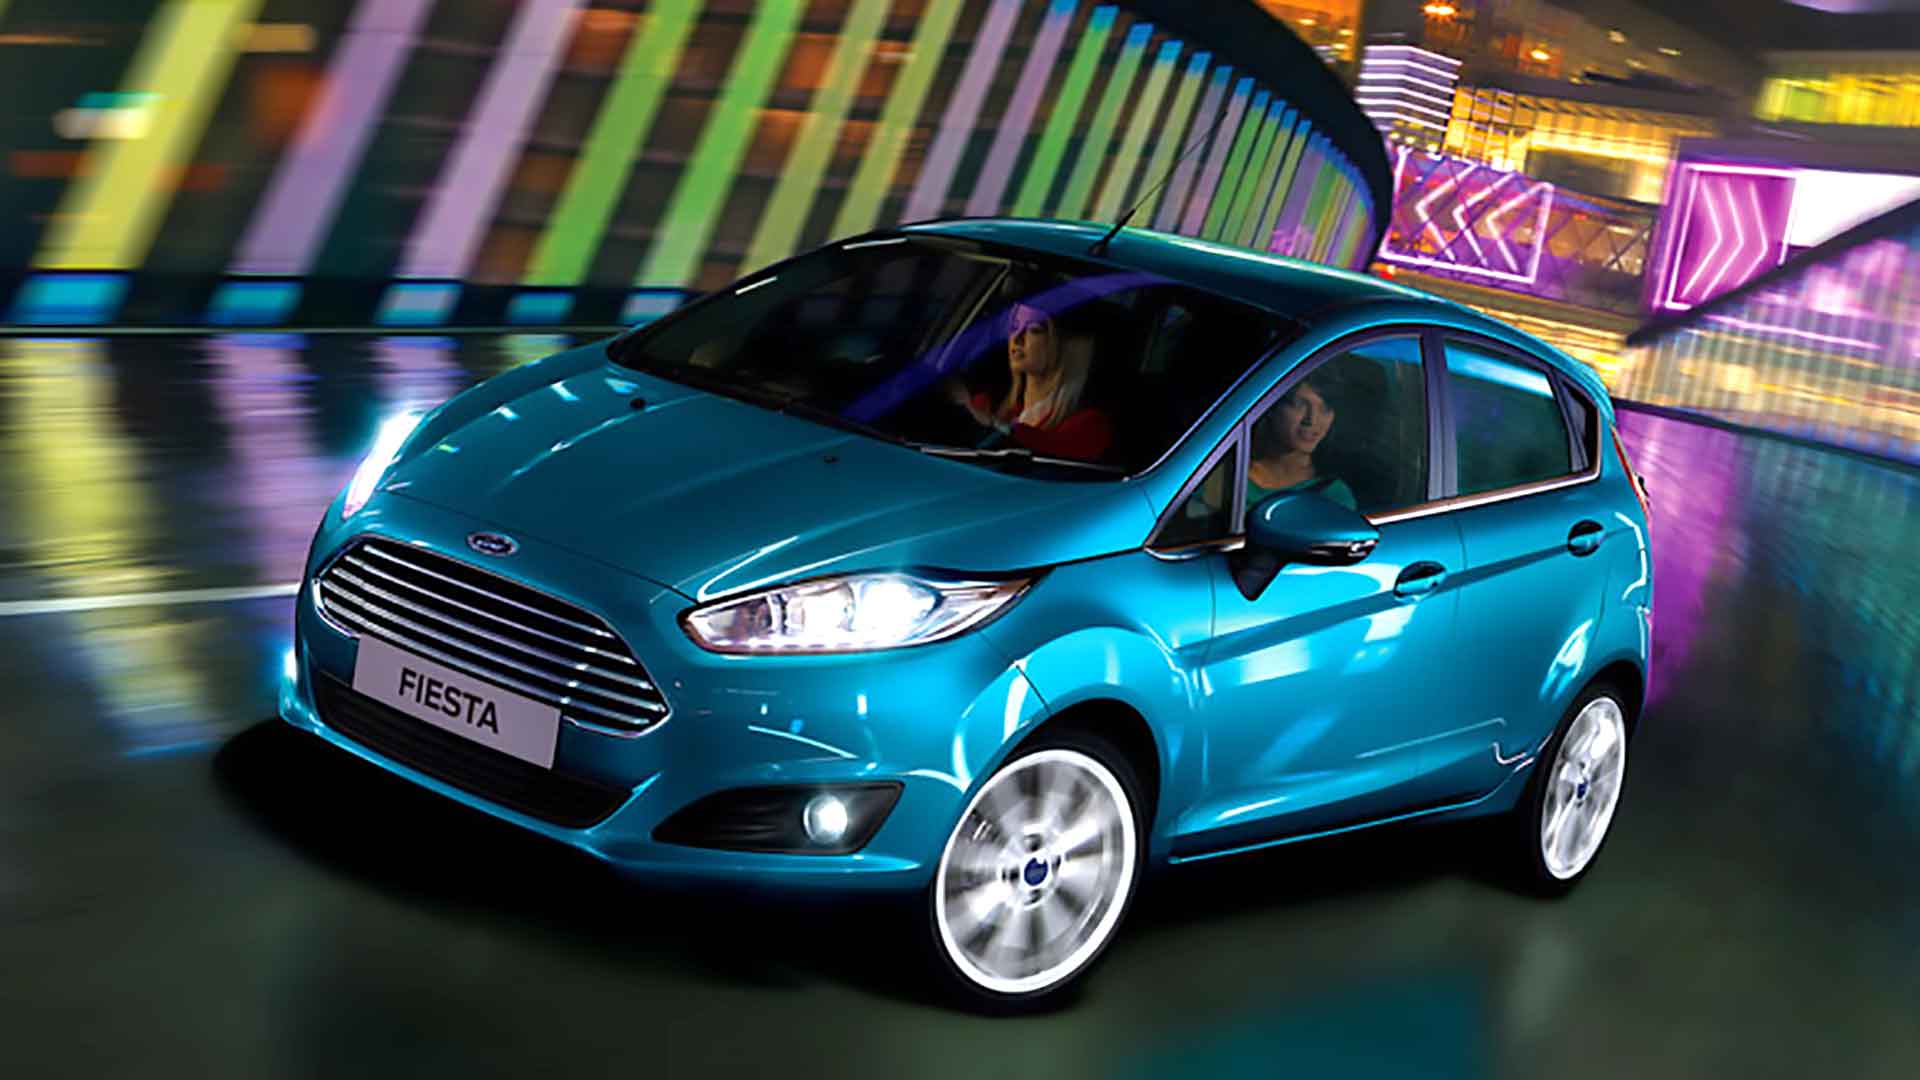 Why Is The Ford Fiesta So Insanely Popular In The UK?